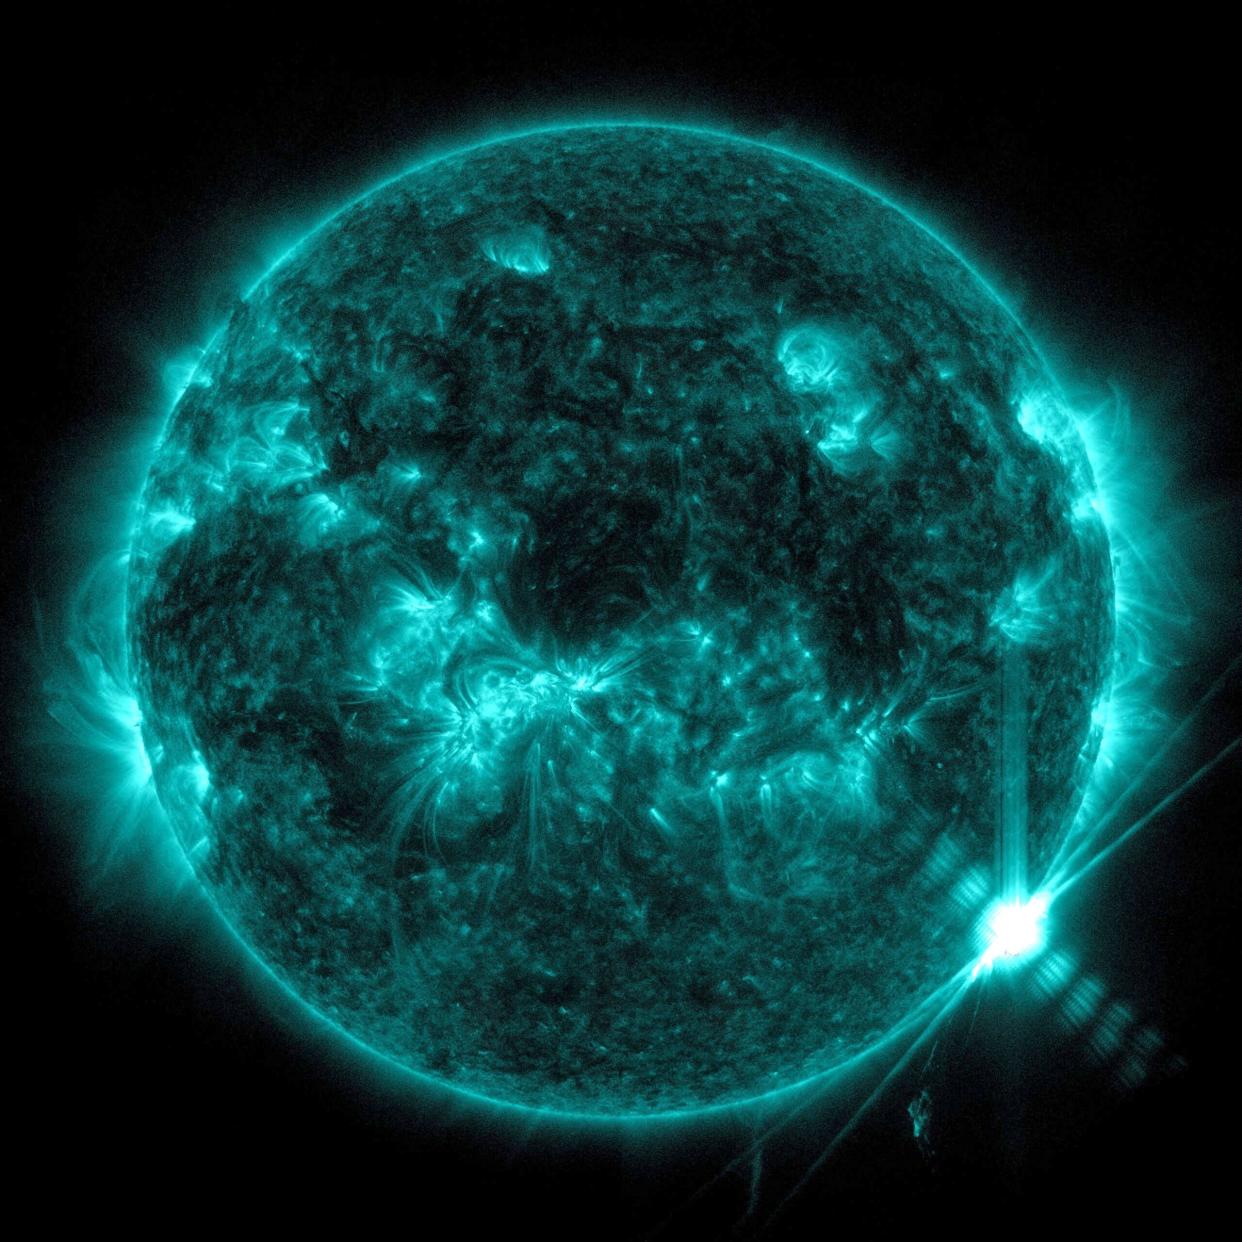 NASA’s Solar Dynamics Observatory captured this image of a solar flare – as seen in the bright flash on the lower right – on Feb. 9, 2024. The image shows a subset of extreme ultraviolet light that highlights the extremely hot material in flares, and which is colorized in teal.